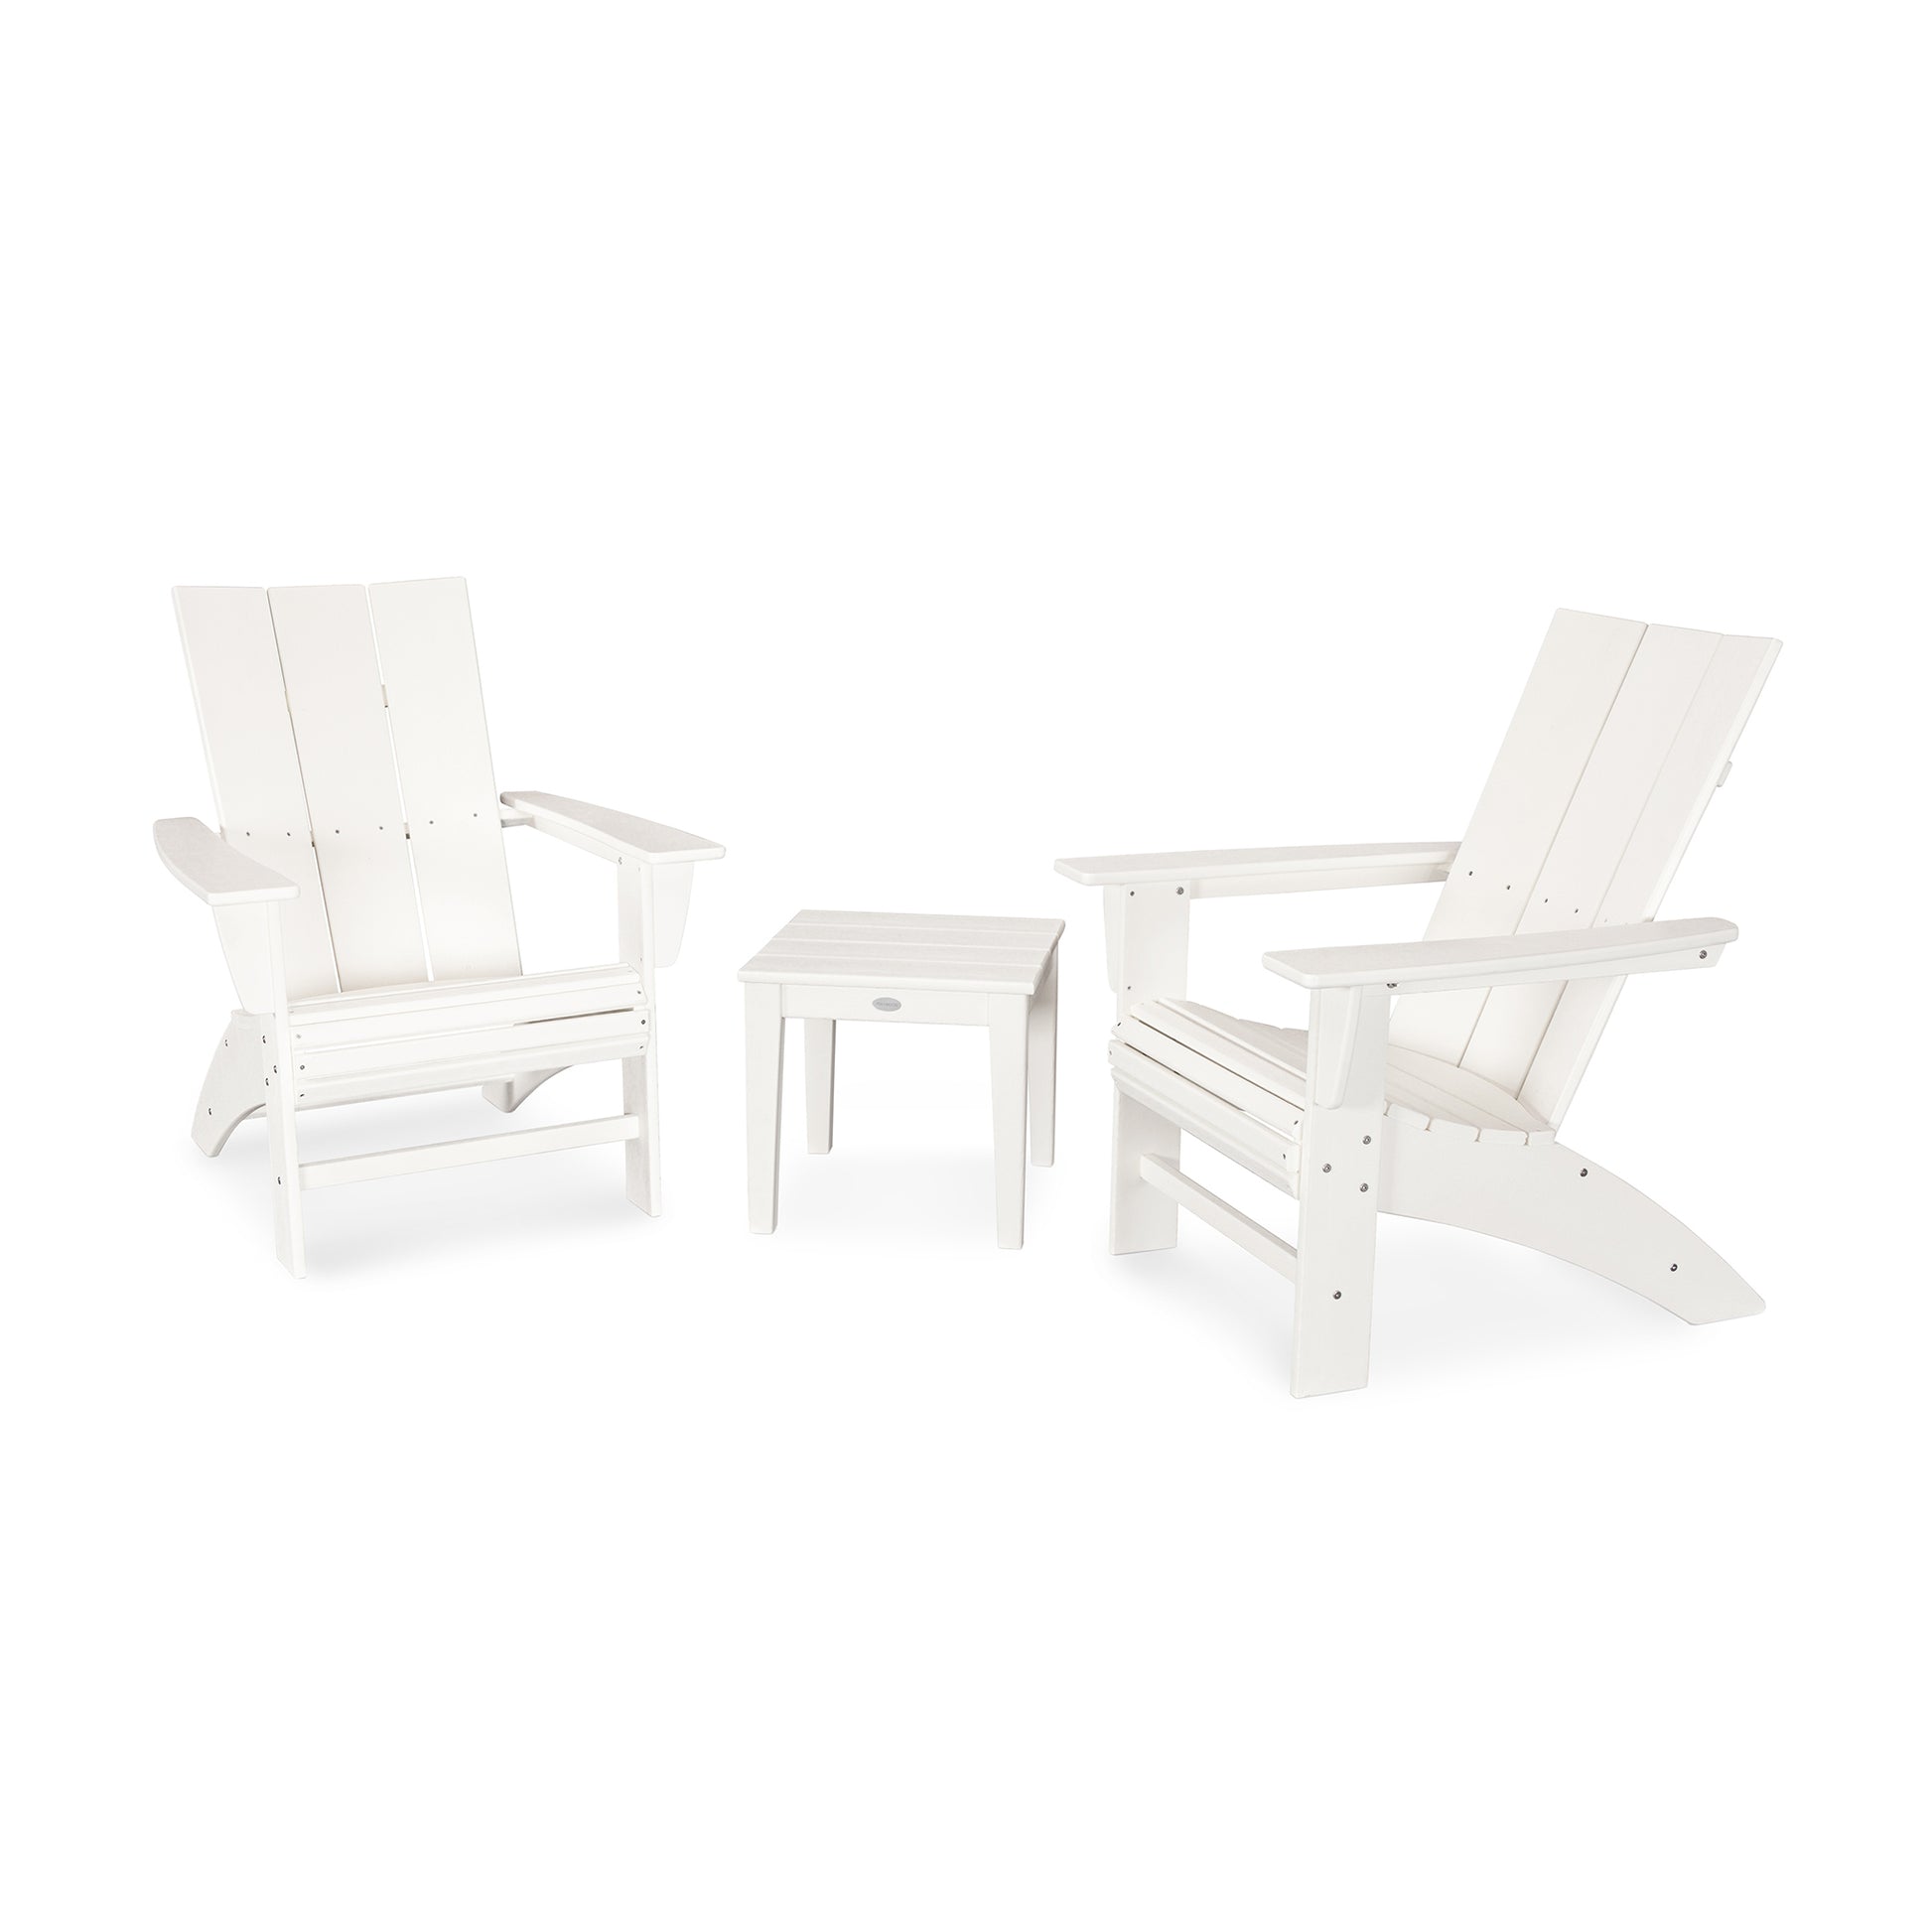 Two white POLYWOOD Modern Curveback Adirondack 3-Piece Set chairs with a small matching side table between them, set against a plain white background. The furniture is crafted from POLYWOOD lumber.